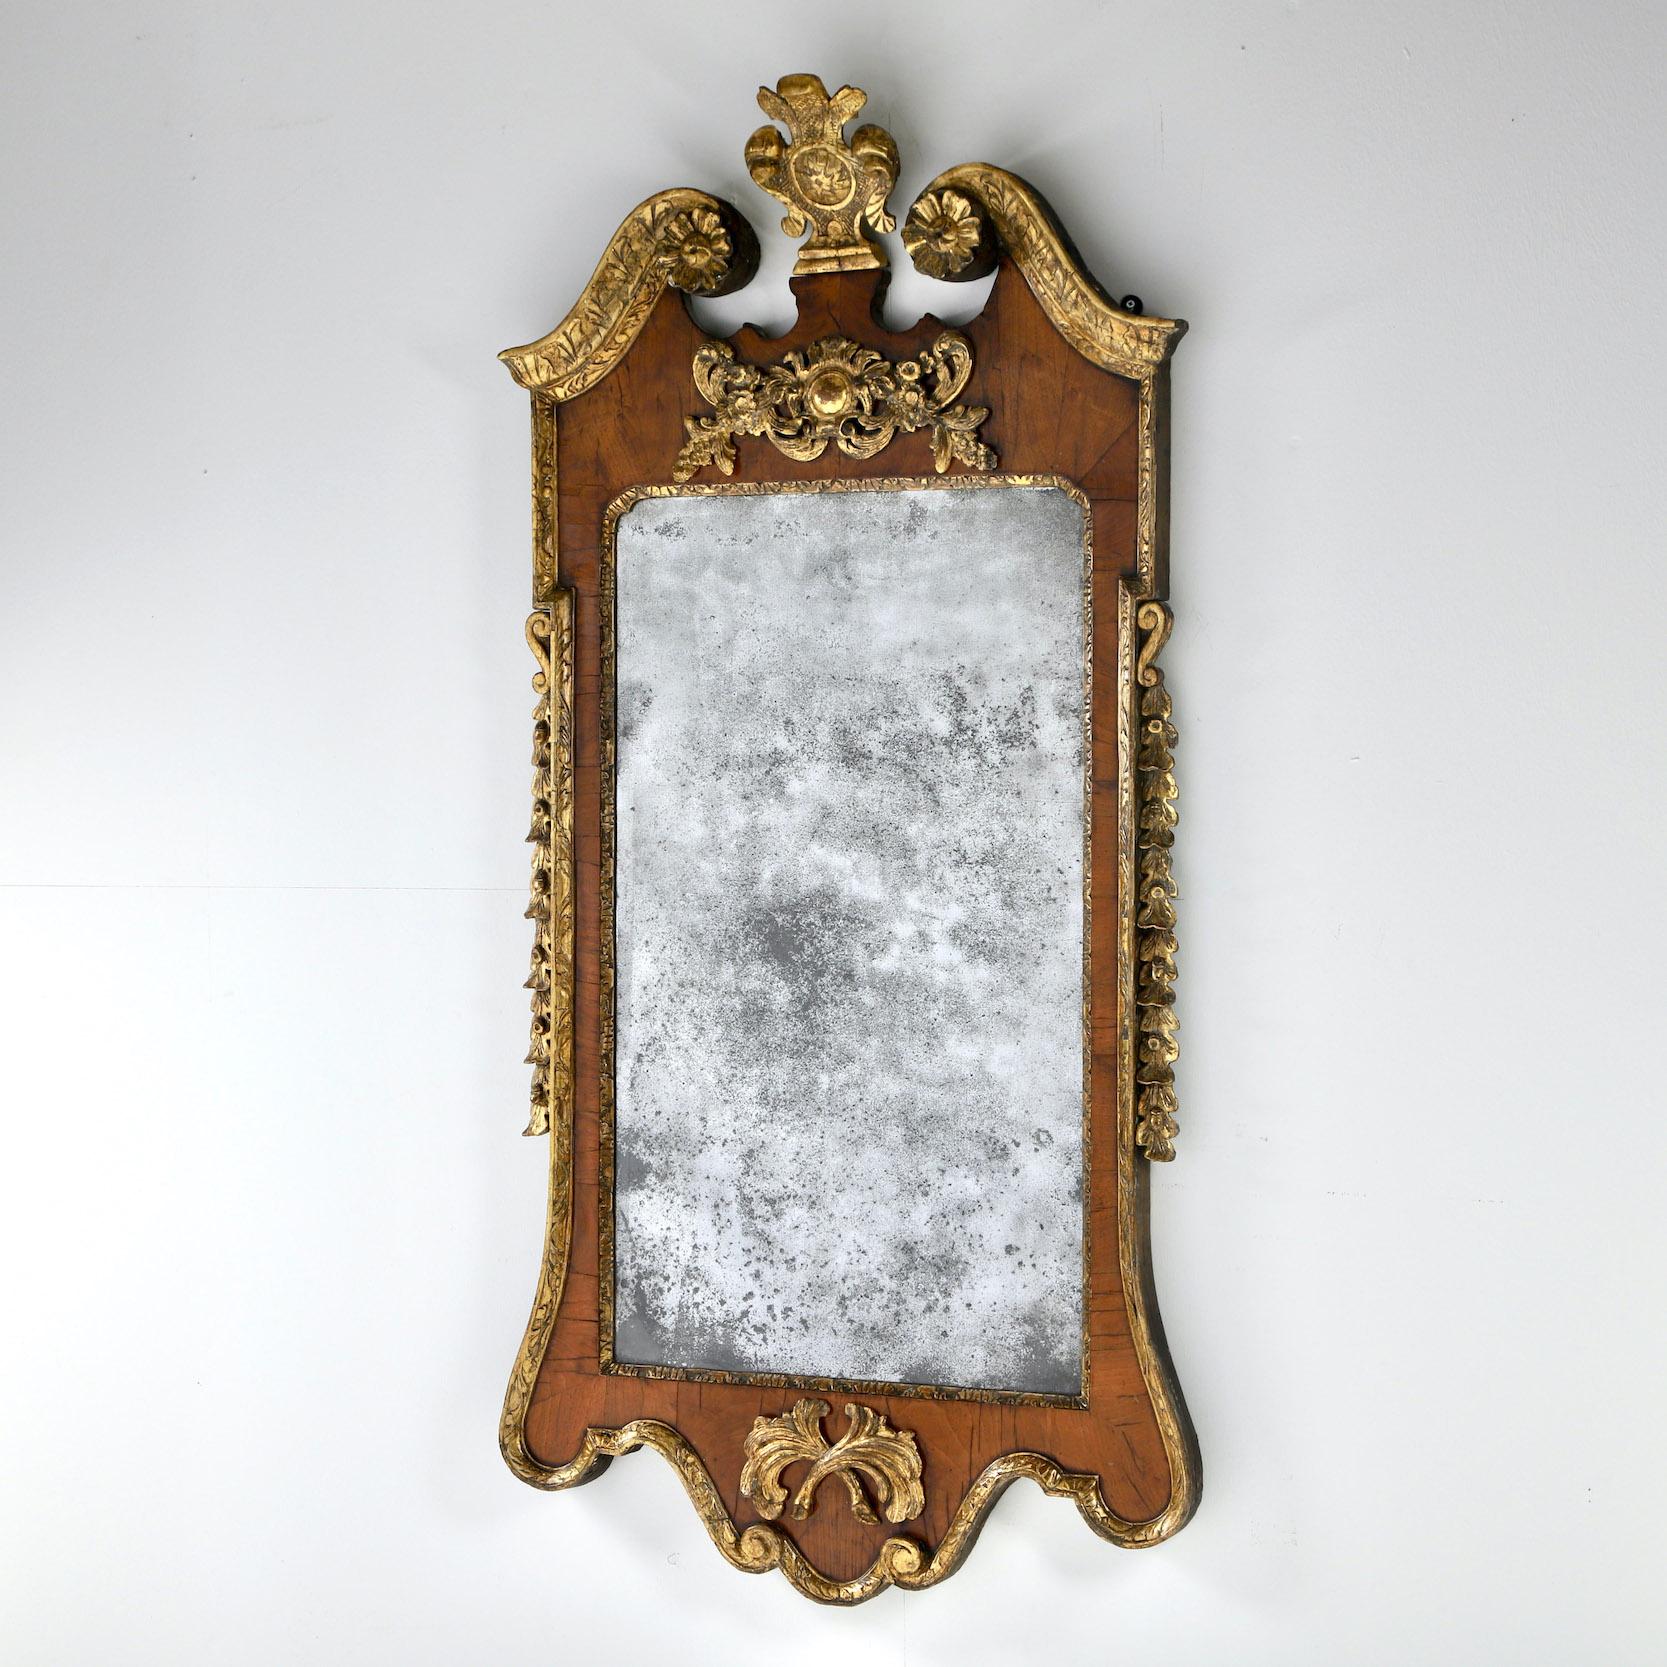 V A G A B O N D presents a fine George II walnut and parcel gilt mirror in the manner of William Kent, with its original mirror glass.

England, Circa 1730

Provenance: Private collection, Kent House


